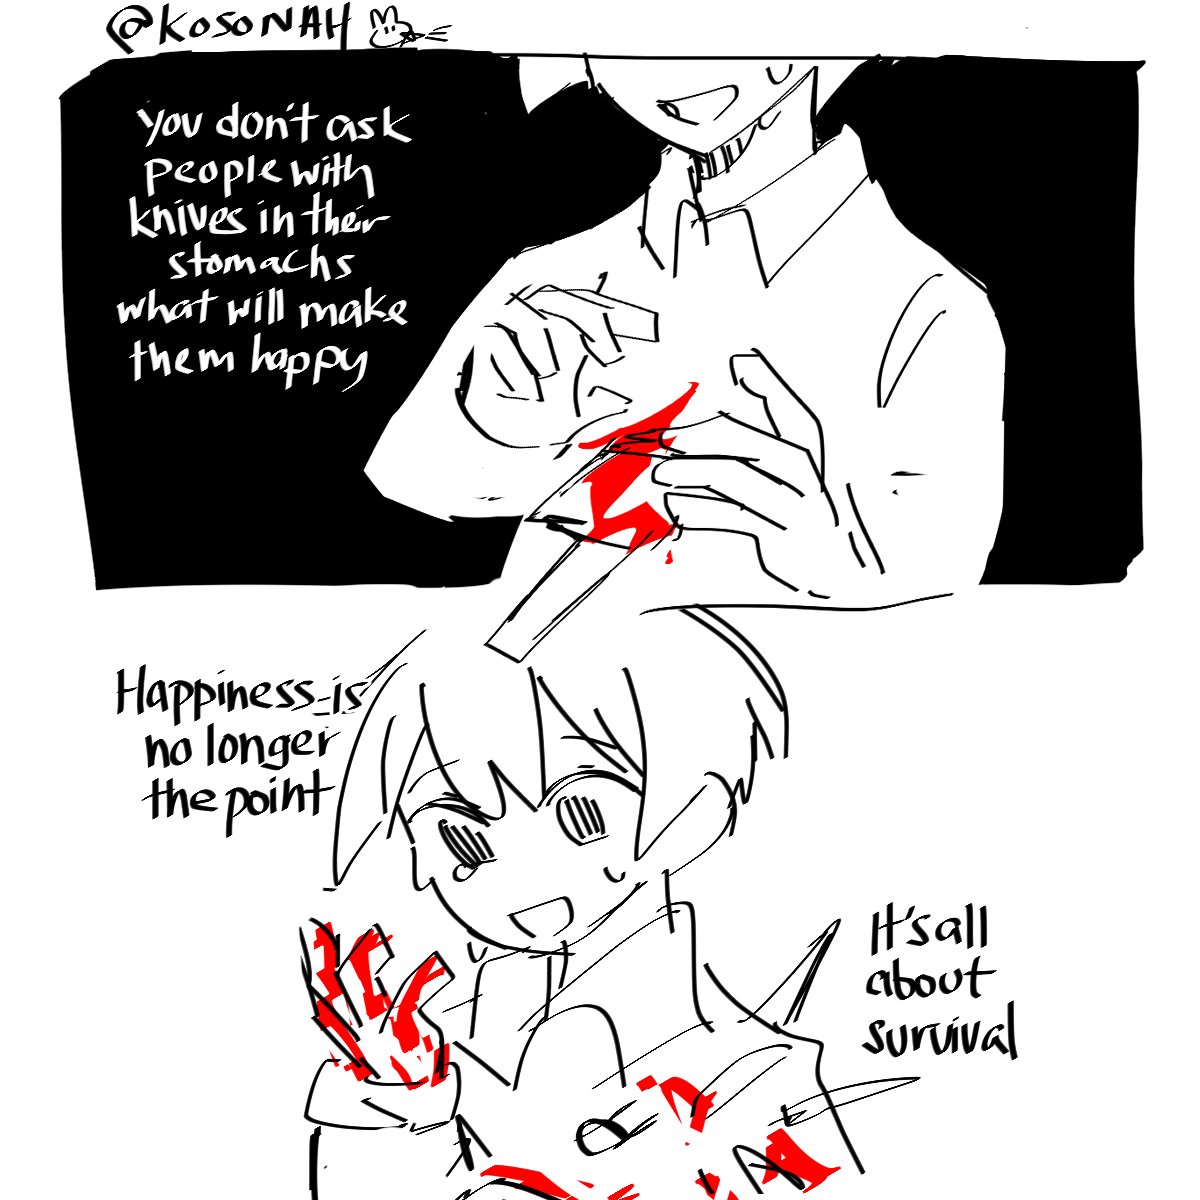 tw // blood , knives , knife

quote by Nick Hornby, How to Be Good 